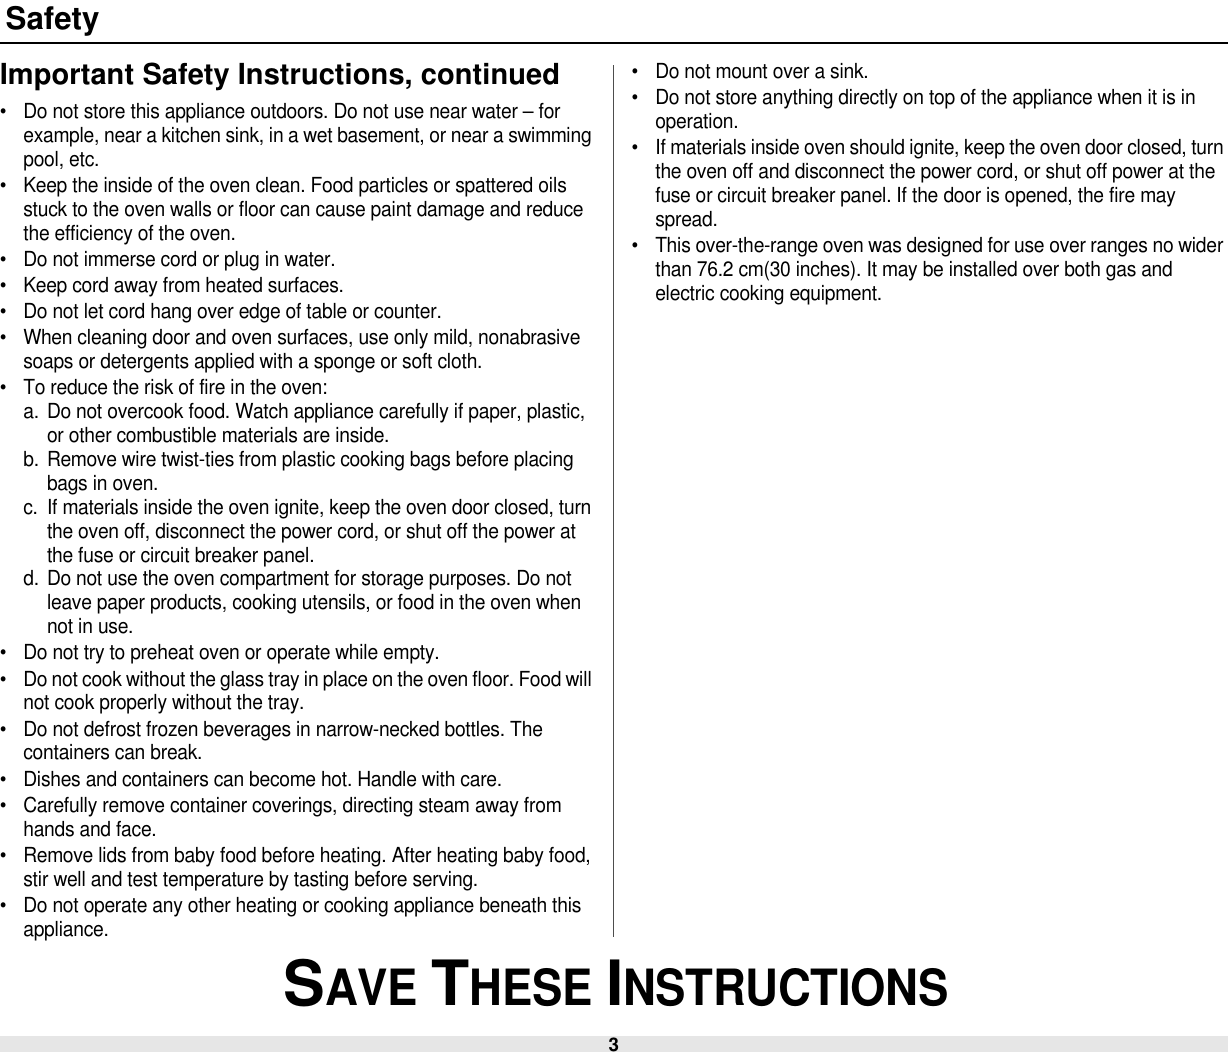 3 SAVE THESE INSTRUCTIONSSafetyImportant Safety Instructions, continued• Do not store this appliance outdoors. Do not use near water – for example, near a kitchen sink, in a wet basement, or near a swimming pool, etc. • Keep the inside of the oven clean. Food particles or spattered oils stuck to the oven walls or floor can cause paint damage and reduce the efficiency of the oven.• Do not immerse cord or plug in water.• Keep cord away from heated surfaces.• Do not let cord hang over edge of table or counter.• When cleaning door and oven surfaces, use only mild, nonabrasive soaps or detergents applied with a sponge or soft cloth.• To reduce the risk of fire in the oven:a. Do not overcook food. Watch appliance carefully if paper, plastic, or other combustible materials are inside.b. Remove wire twist-ties from plastic cooking bags before placing bags in oven.c. If materials inside the oven ignite, keep the oven door closed, turn the oven off, disconnect the power cord, or shut off the power at the fuse or circuit breaker panel.d. Do not use the oven compartment for storage purposes. Do not leave paper products, cooking utensils, or food in the oven when not in use.• Do not try to preheat oven or operate while empty.• Do not cook without the glass tray in place on the oven floor. Food will not cook properly without the tray.• Do not defrost frozen beverages in narrow-necked bottles. The containers can break.• Dishes and containers can become hot. Handle with care.• Carefully remove container coverings, directing steam away from hands and face.• Remove lids from baby food before heating. After heating baby food, stir well and test temperature by tasting before serving.• Do not operate any other heating or cooking appliance beneath this appliance.• Do not mount over a sink.• Do not store anything directly on top of the appliance when it is in operation.• If materials inside oven should ignite, keep the oven door closed, turn the oven off and disconnect the power cord, or shut off power at the fuse or circuit breaker panel. If the door is opened, the fire may spread.• This over-the-range oven was designed for use over ranges no wider than 76.2 cm(30 inches). It may be installed over both gas and electric cooking equipment.